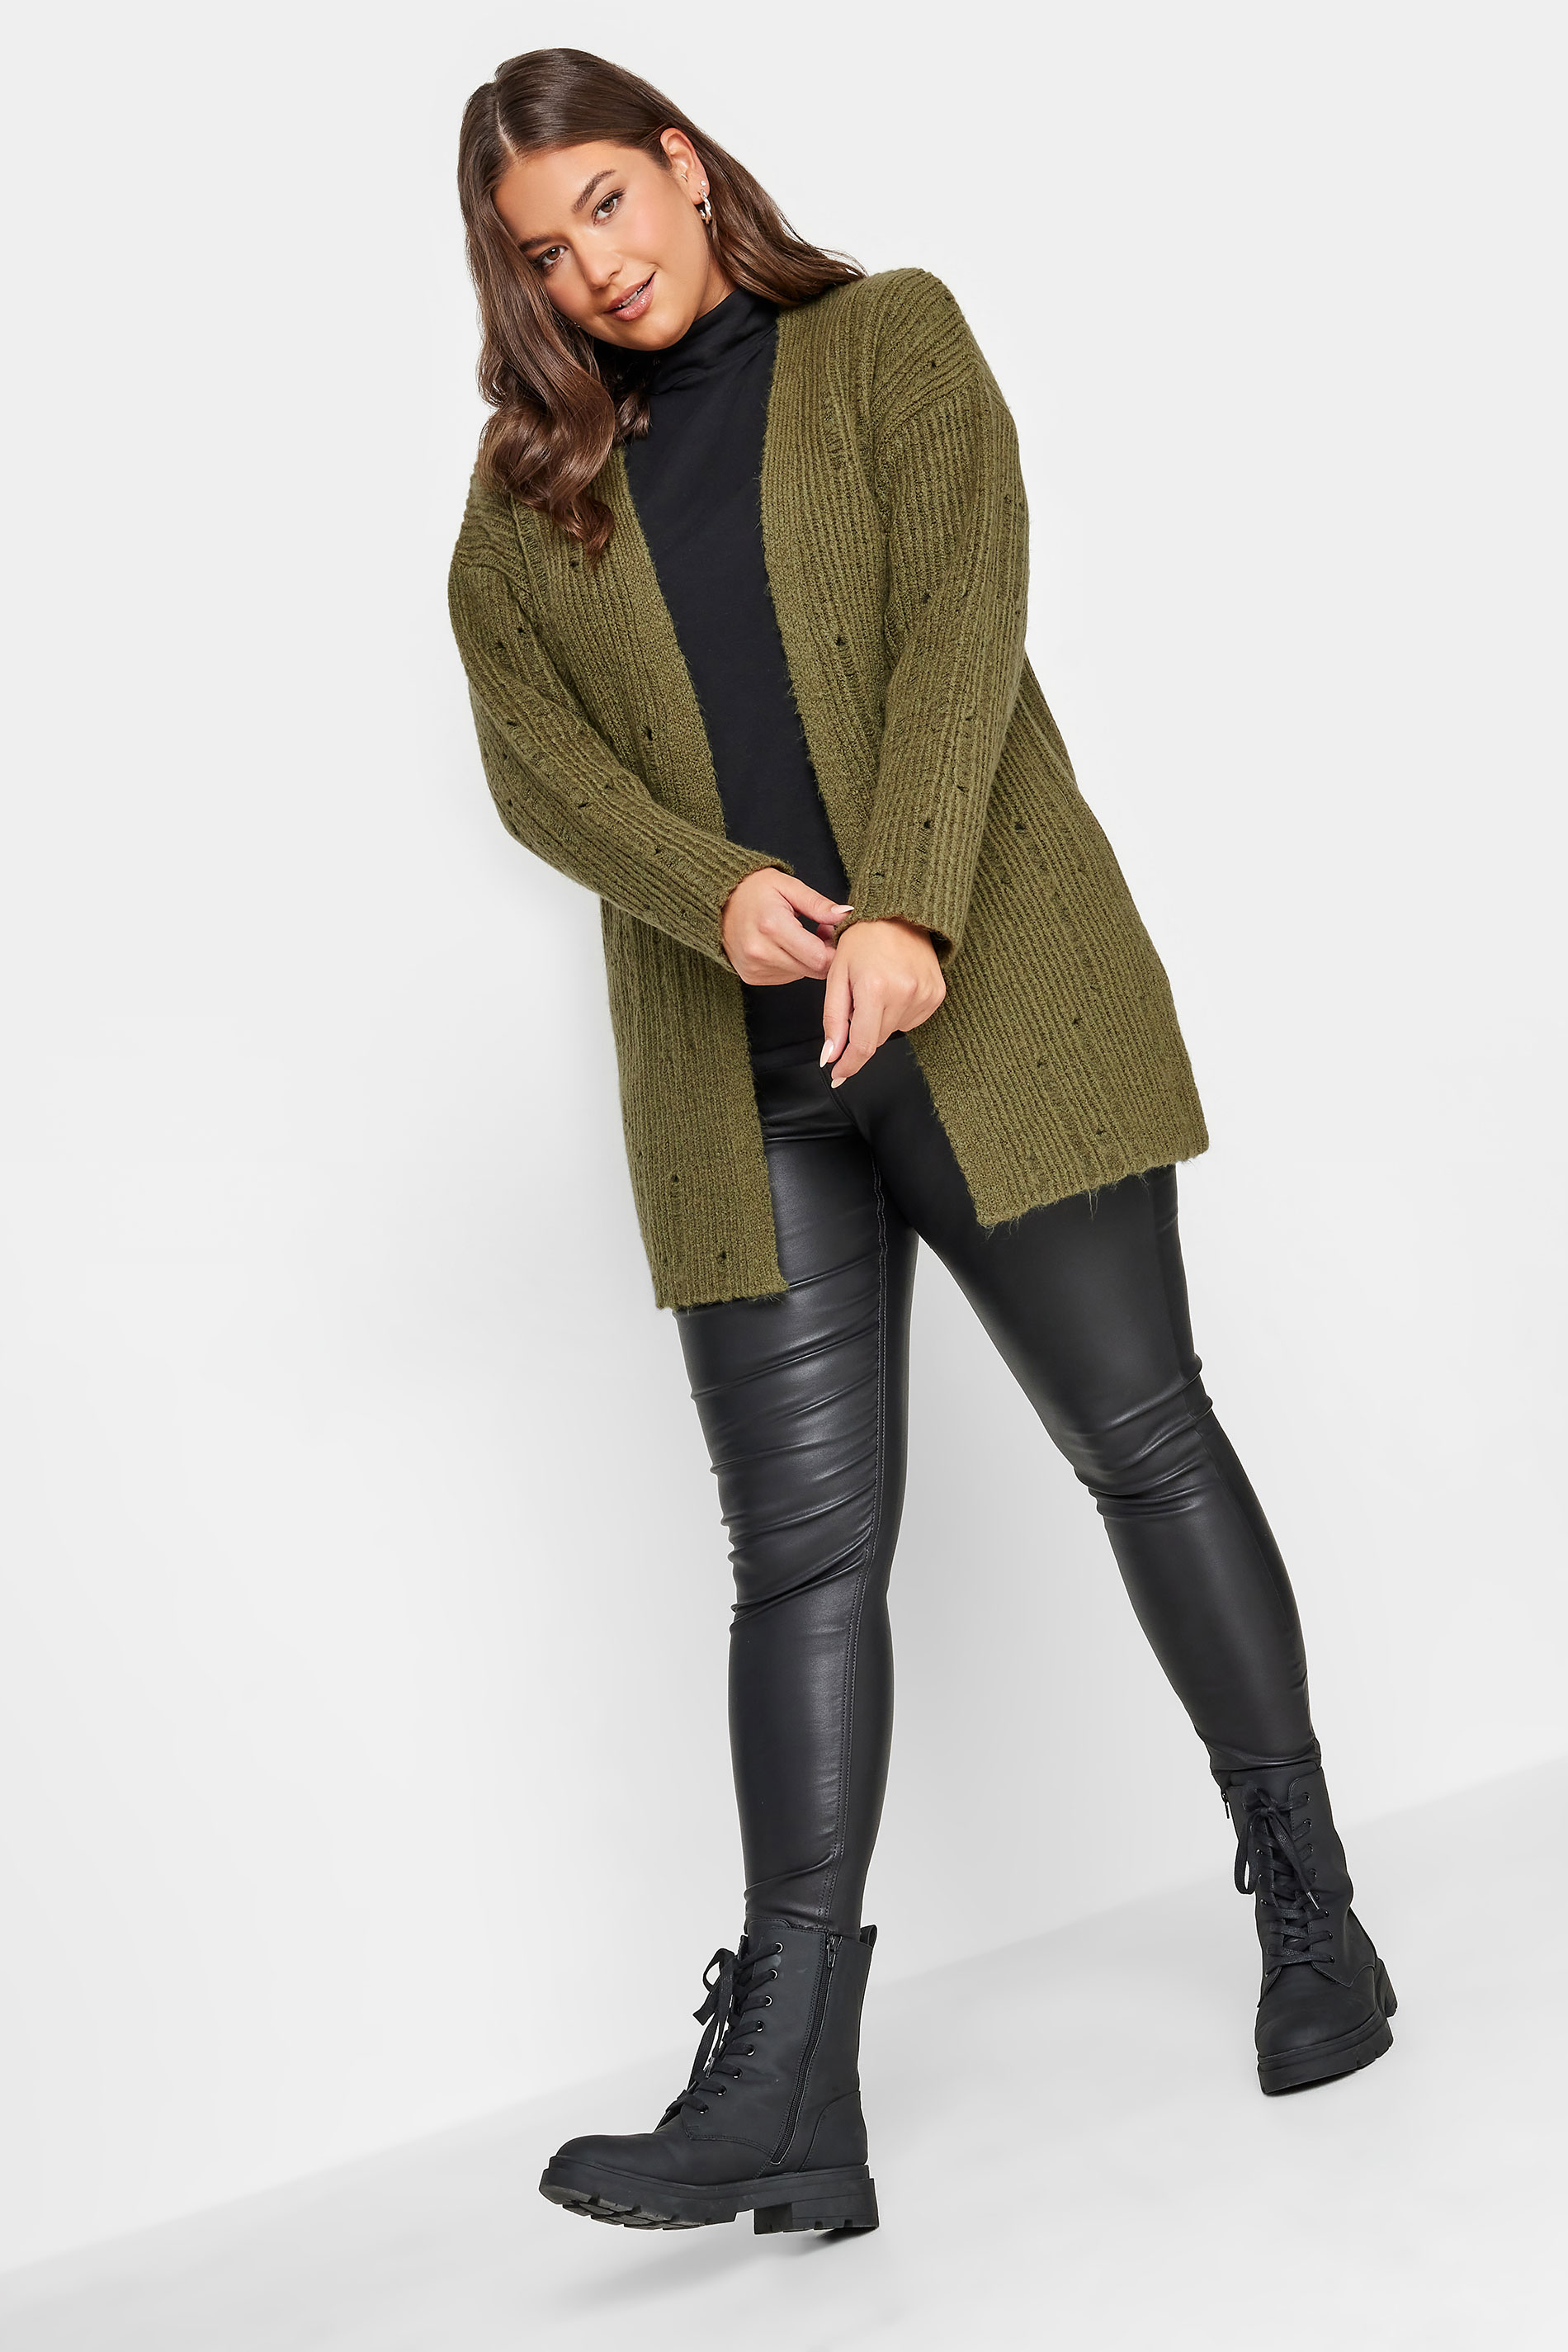 YOURS Plus Size Khaki Green Distressed Knit Cardigan | Yours Clothing 3